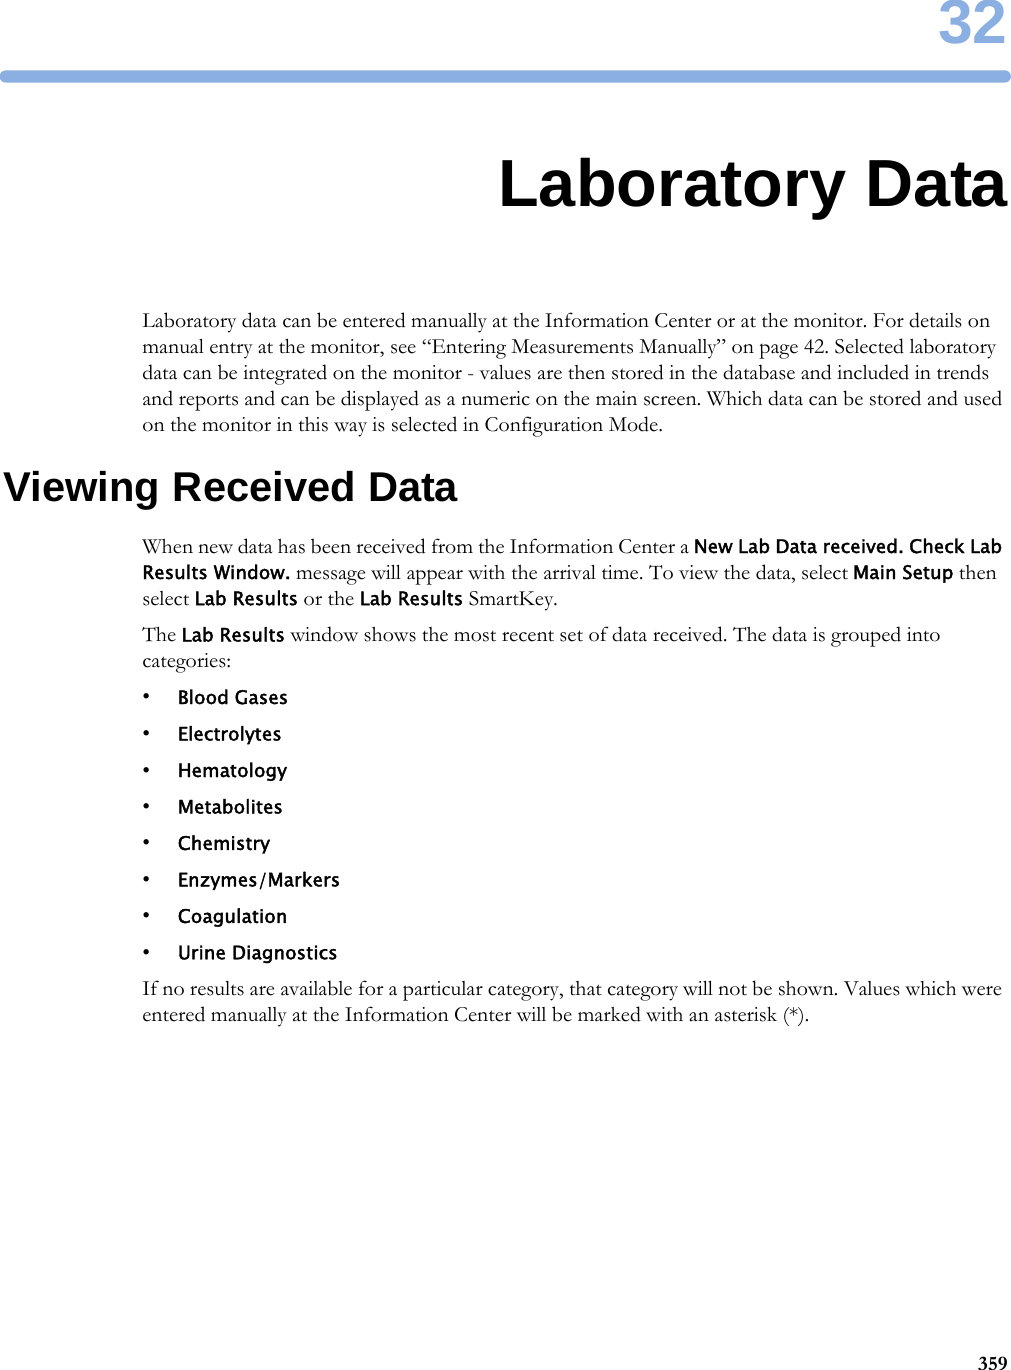 3235932Laboratory DataLaboratory data can be entered manually at the Information Center or at the monitor. For details on manual entry at the monitor, see “Entering Measurements Manually” on page 42. Selected laboratory data can be integrated on the monitor - values are then stored in the database and included in trends and reports and can be displayed as a numeric on the main screen. Which data can be stored and used on the monitor in this way is selected in Configuration Mode.Viewing Received DataWhen new data has been received from the Information Center a New Lab Data received. Check Lab Results Window. message will appear with the arrival time. To view the data, select Main Setup then select Lab Results or the Lab Results SmartKey.The Lab Results window shows the most recent set of data received. The data is grouped into categories:•Blood Gases•Electrolytes•Hematology•Metabolites•Chemistry•Enzymes/Markers•Coagulation•Urine DiagnosticsIf no results are available for a particular category, that category will not be shown. Values which were entered manually at the Information Center will be marked with an asterisk (*).